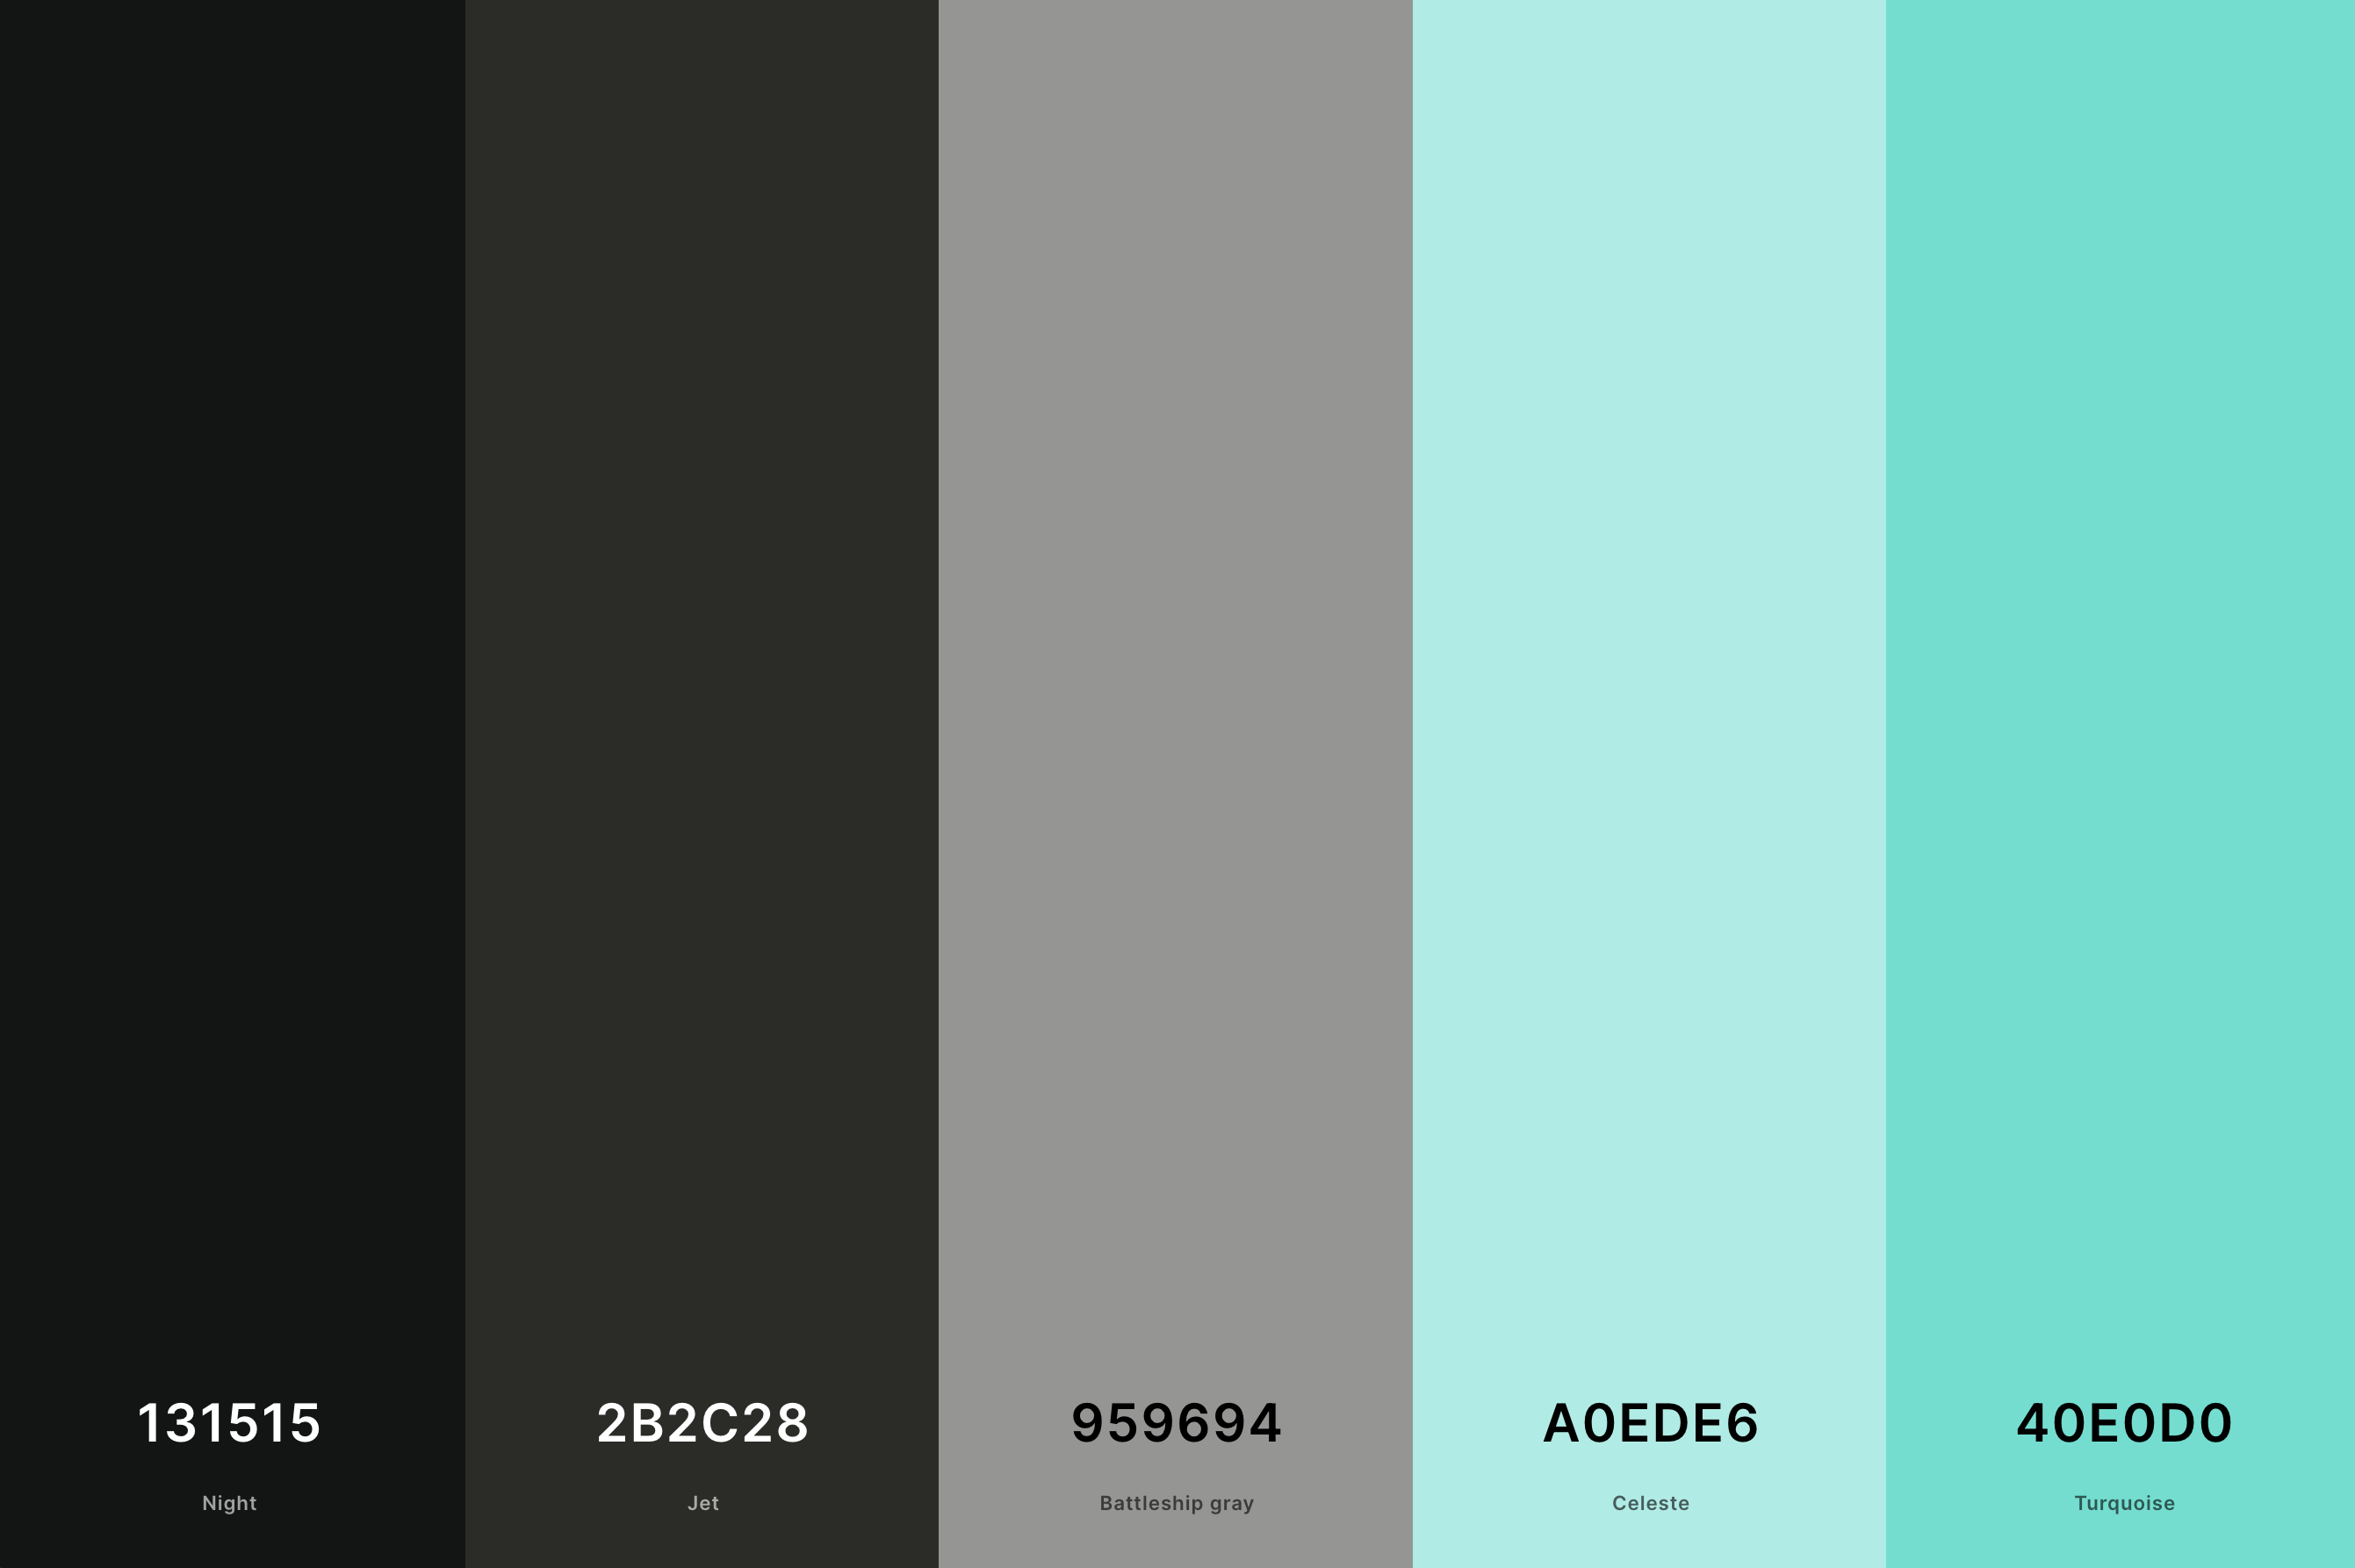 3. Gray And Turquoise Color Palette Color Palette with Night (Hex #131515) + Jet (Hex #2B2C28) + Battleship Gray (Hex #959694) + Celeste (Hex #A0EDE6) + Turquoise (Hex #40E0D0) Color Palette with Hex Codes